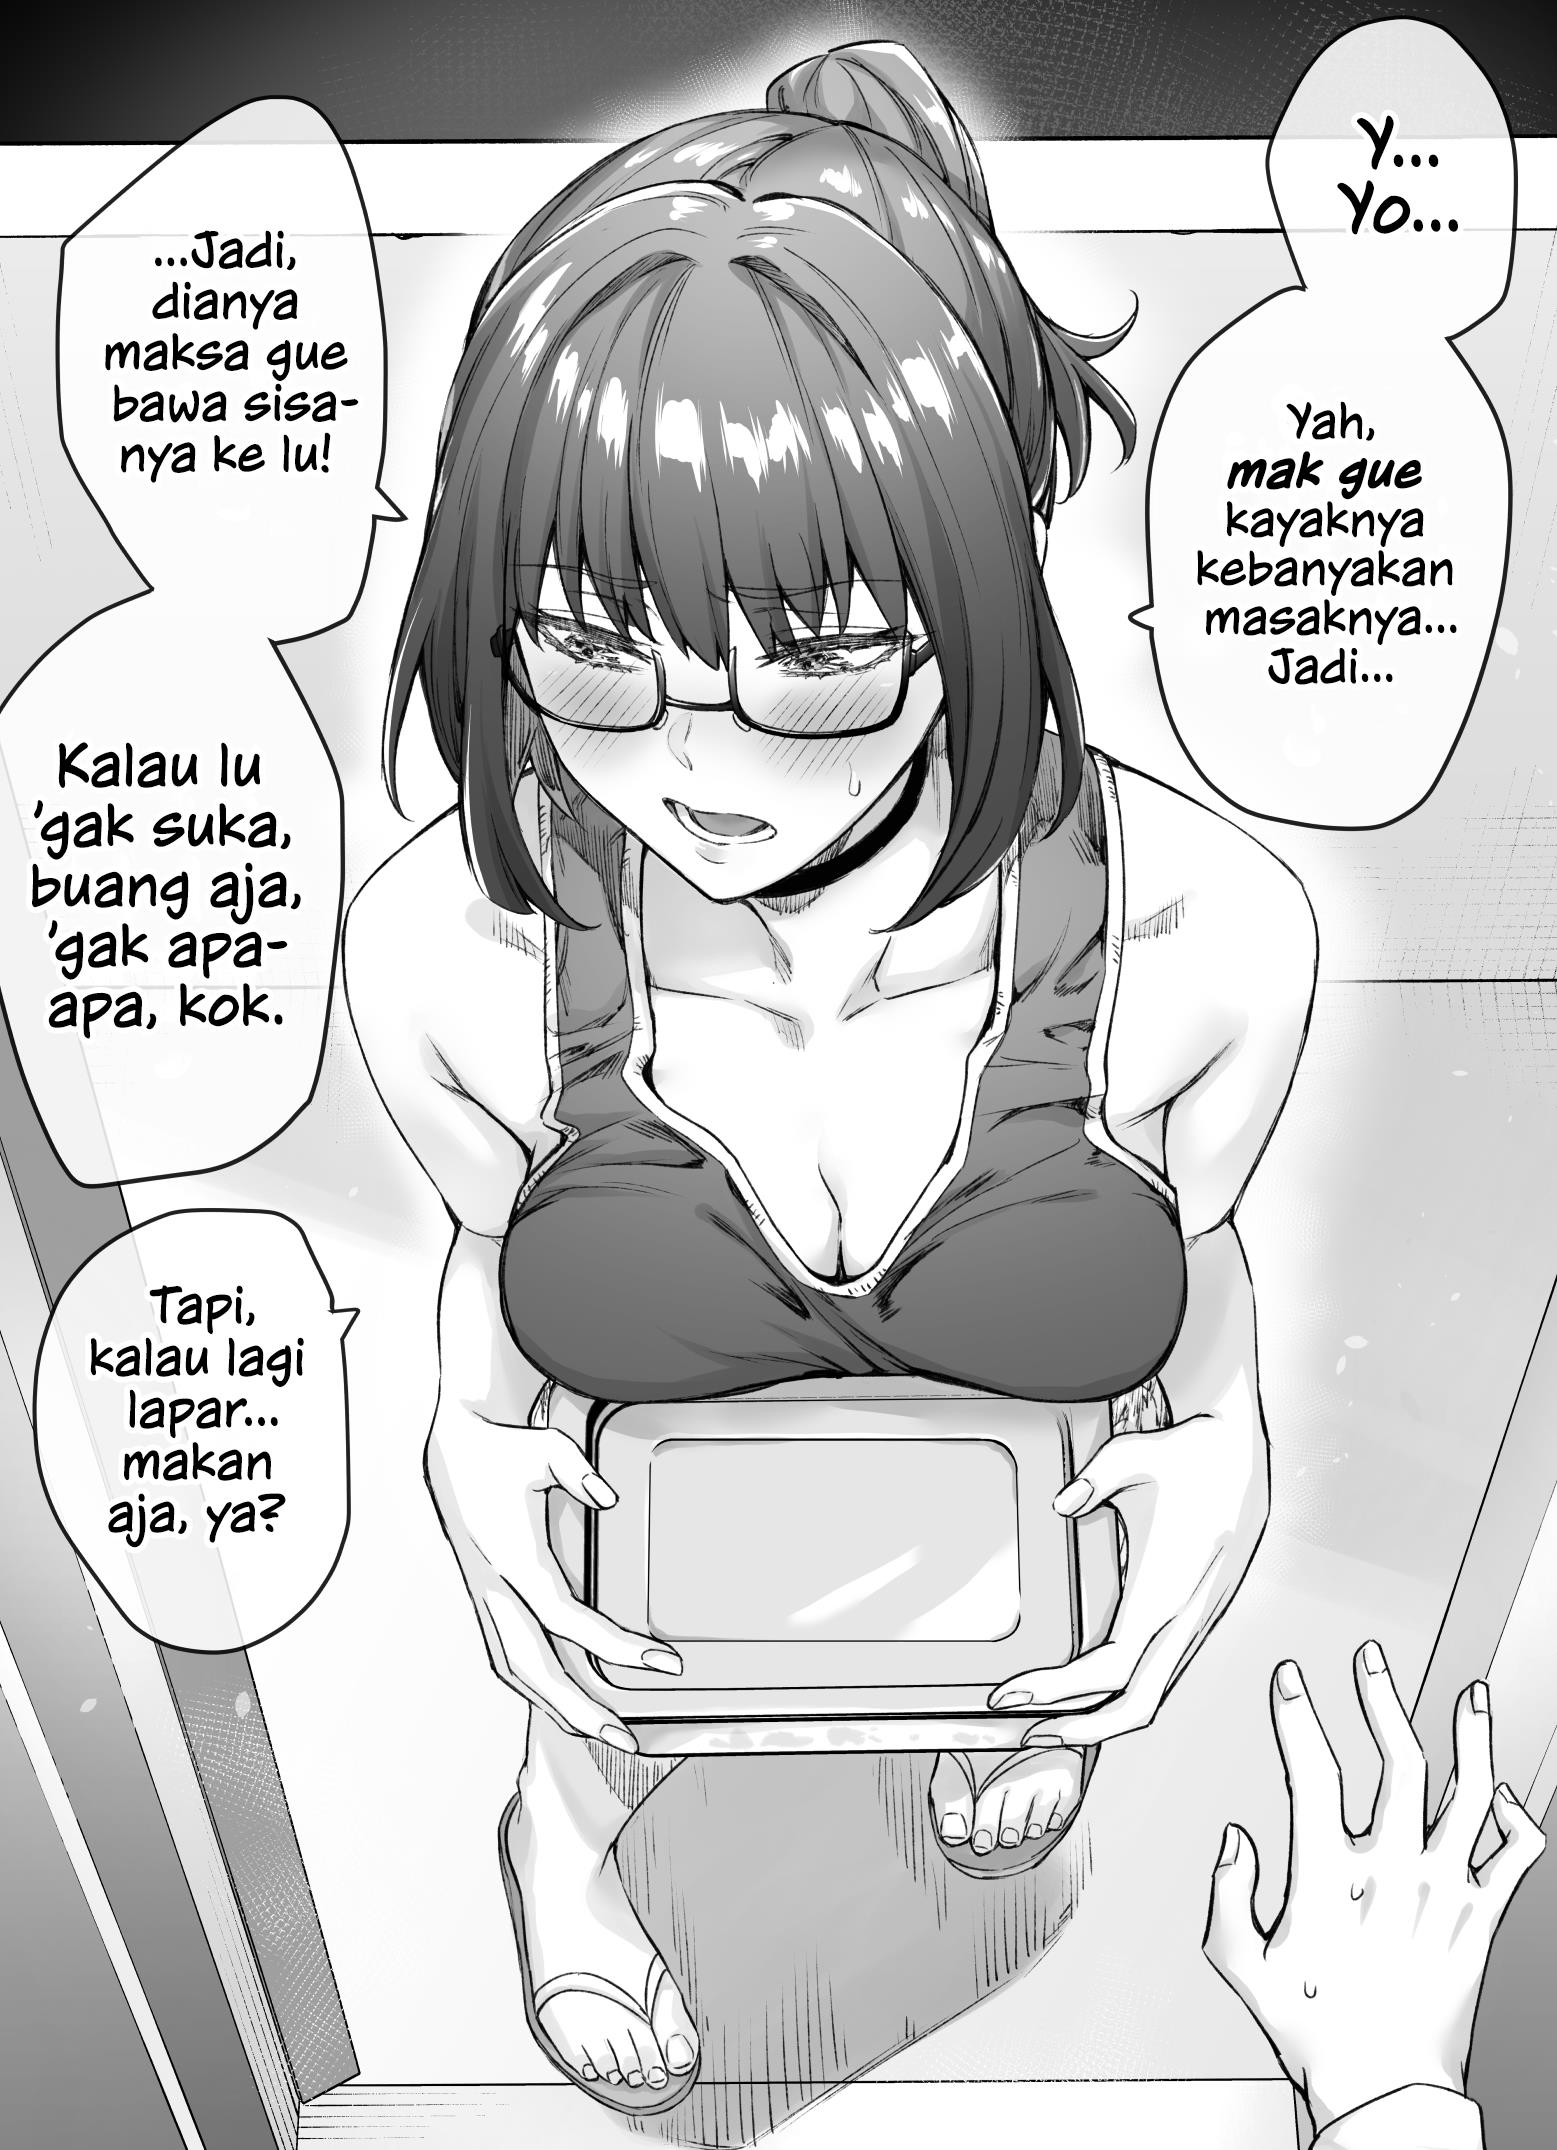 The Tsuntsuntsuntsuntsuntsun tsuntsuntsuntsuntsundere Girl Getting Less and Less Tsun Day by Day Chapter 18.2